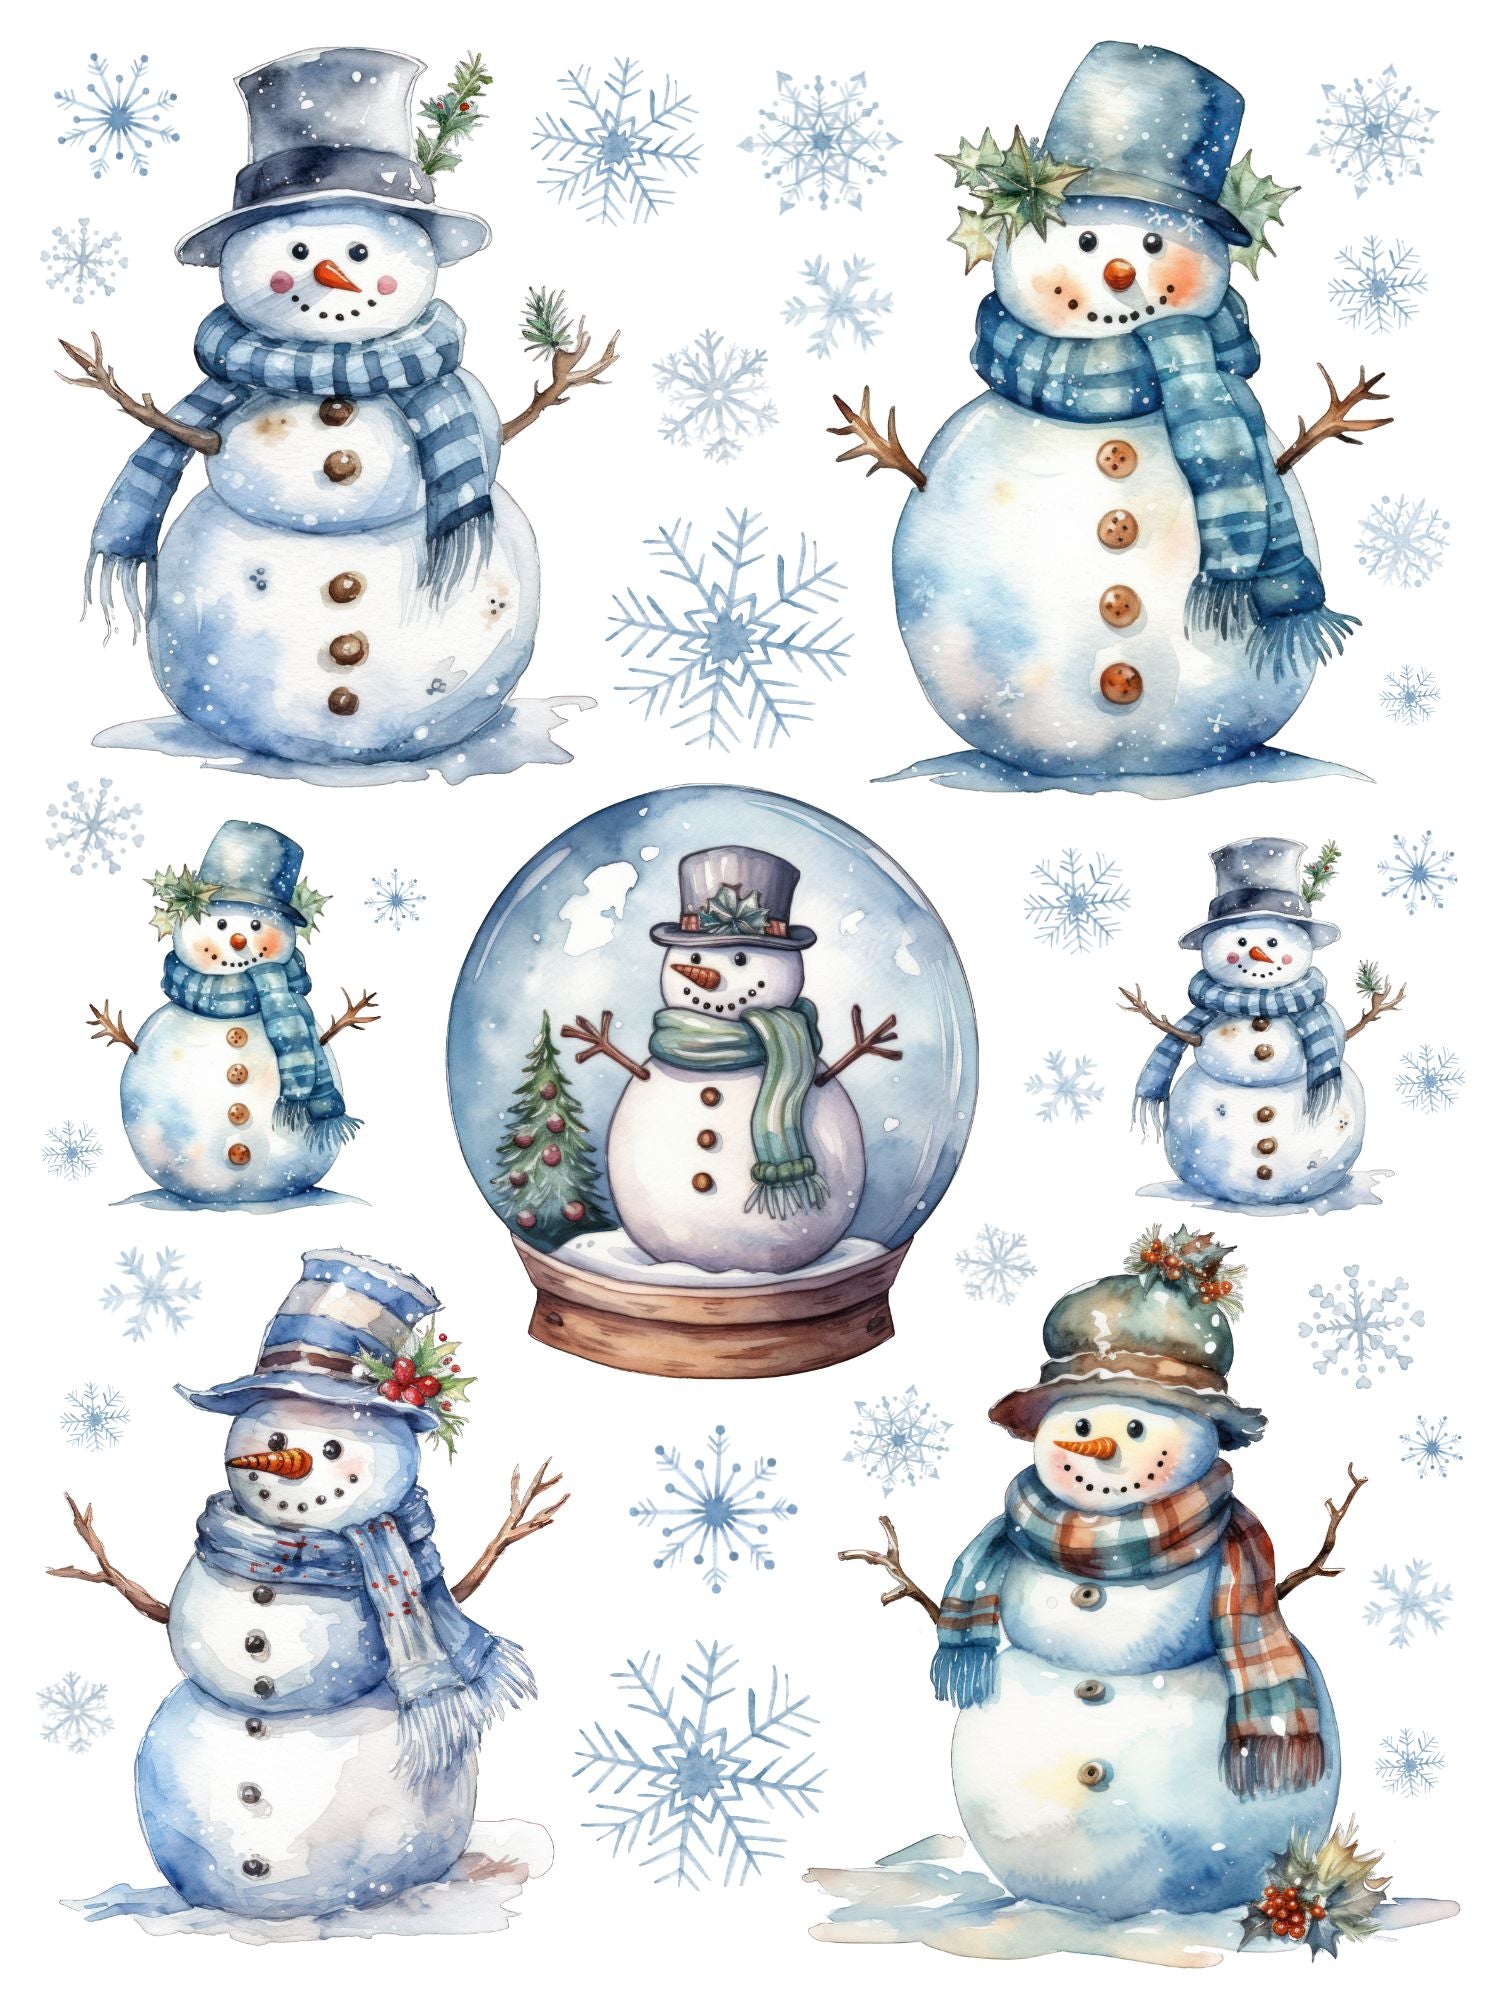 Honoson 20 Sheets Winter Rub on Transfers for Crafts and Furniture Snowman  Snowflake Rub on Transfer Stickers Vintage Winter Gnome Rub on Decals for